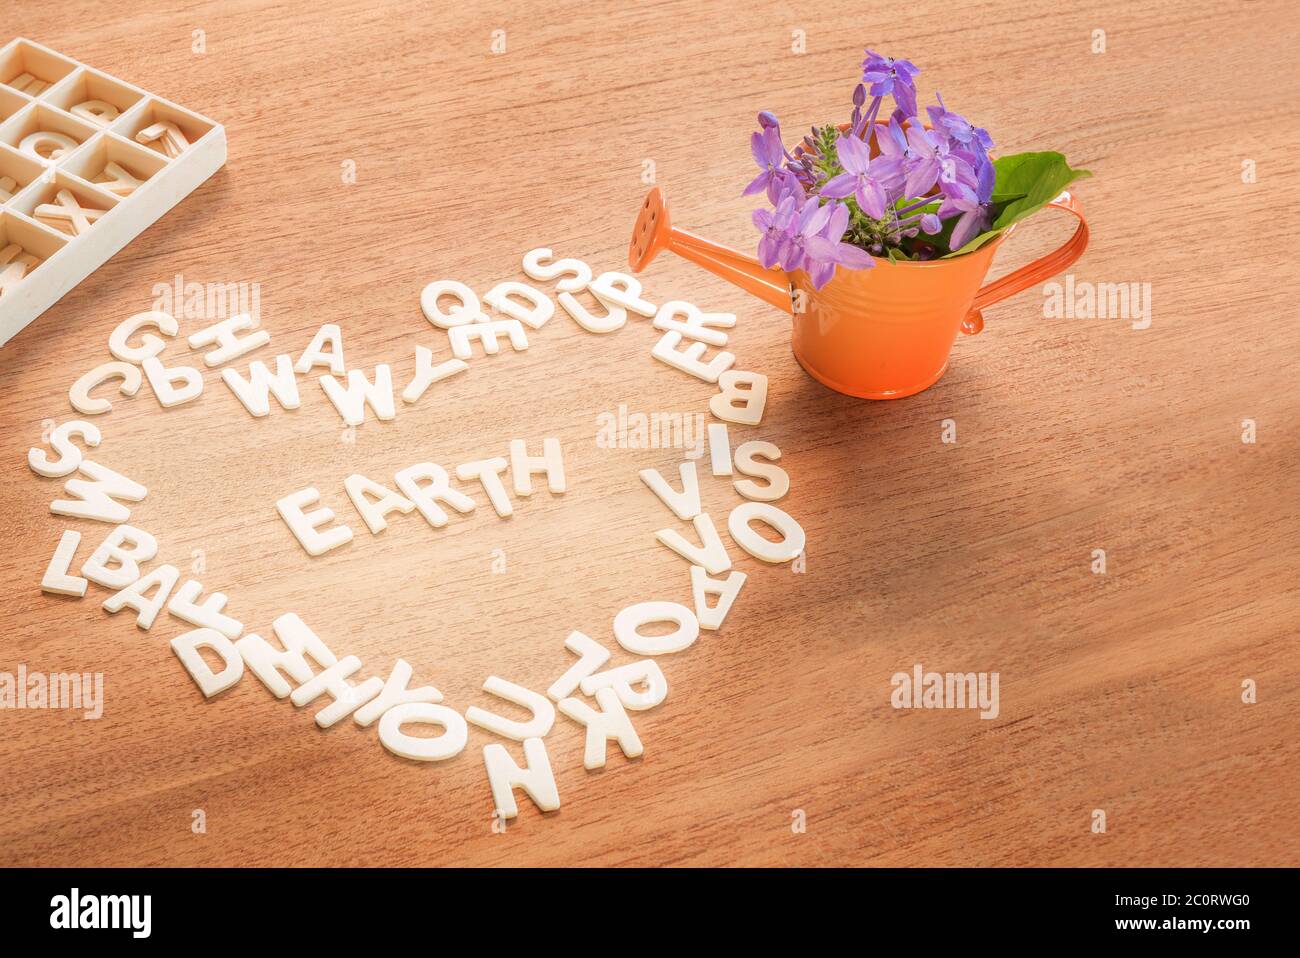 love and save the world concept, wooden alphabet formed heart shape with the word earth inside anda  watering can with flowers on a wood table backgro Stock Photo